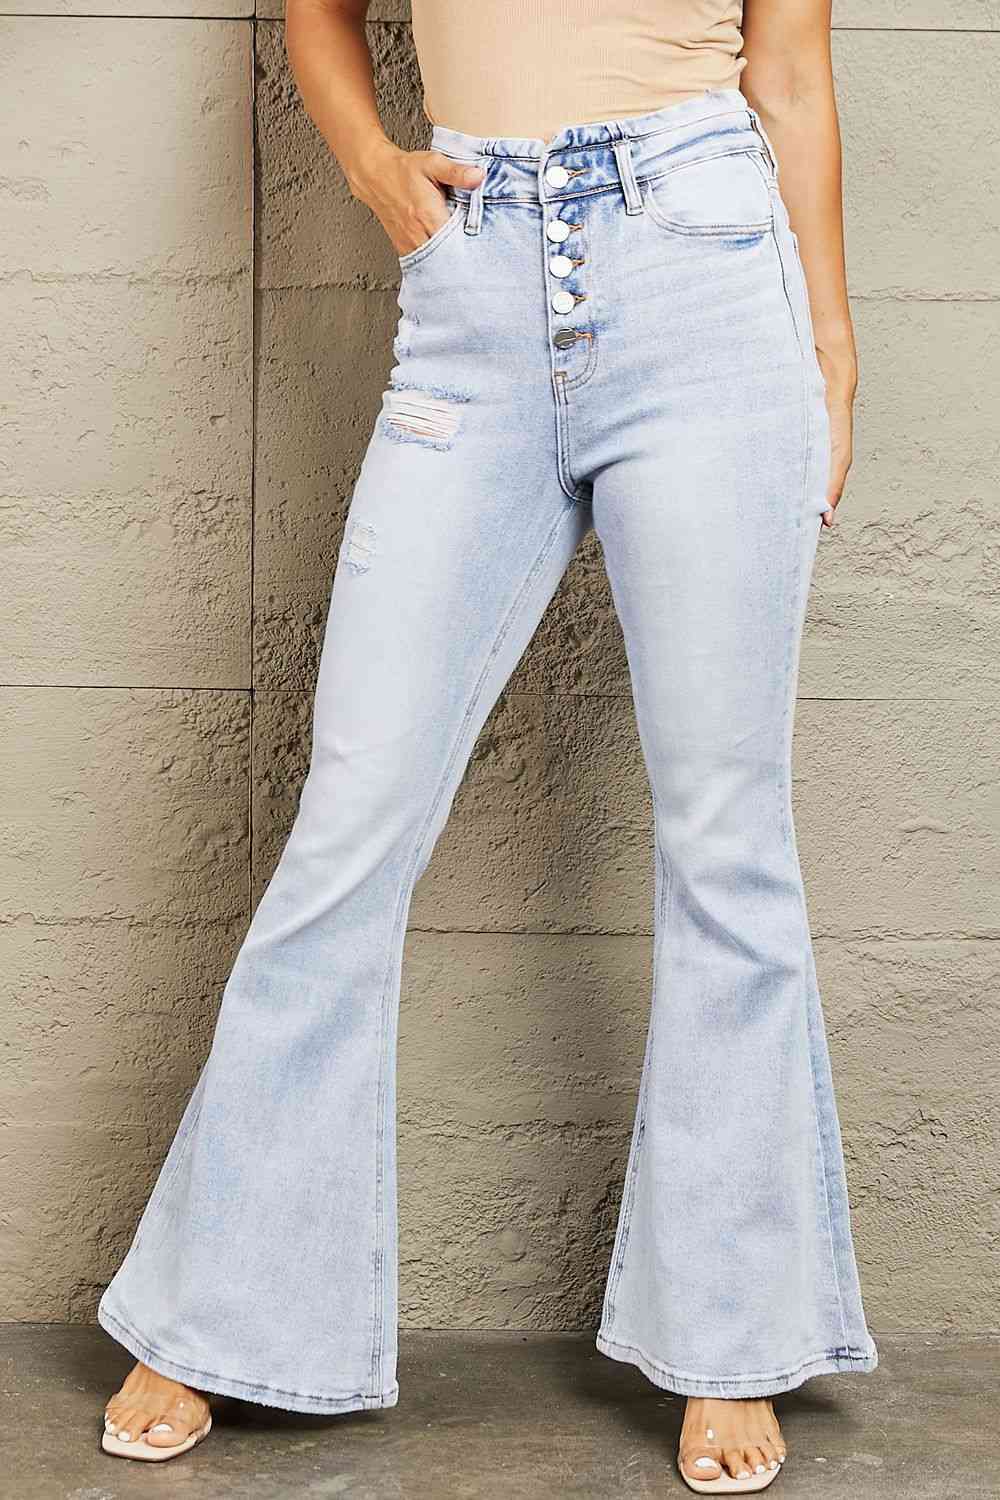 Gray BAYEAS High Waisted Button Fly Flare Jeans Sentient Beauty Fashions Apparel & Accessories